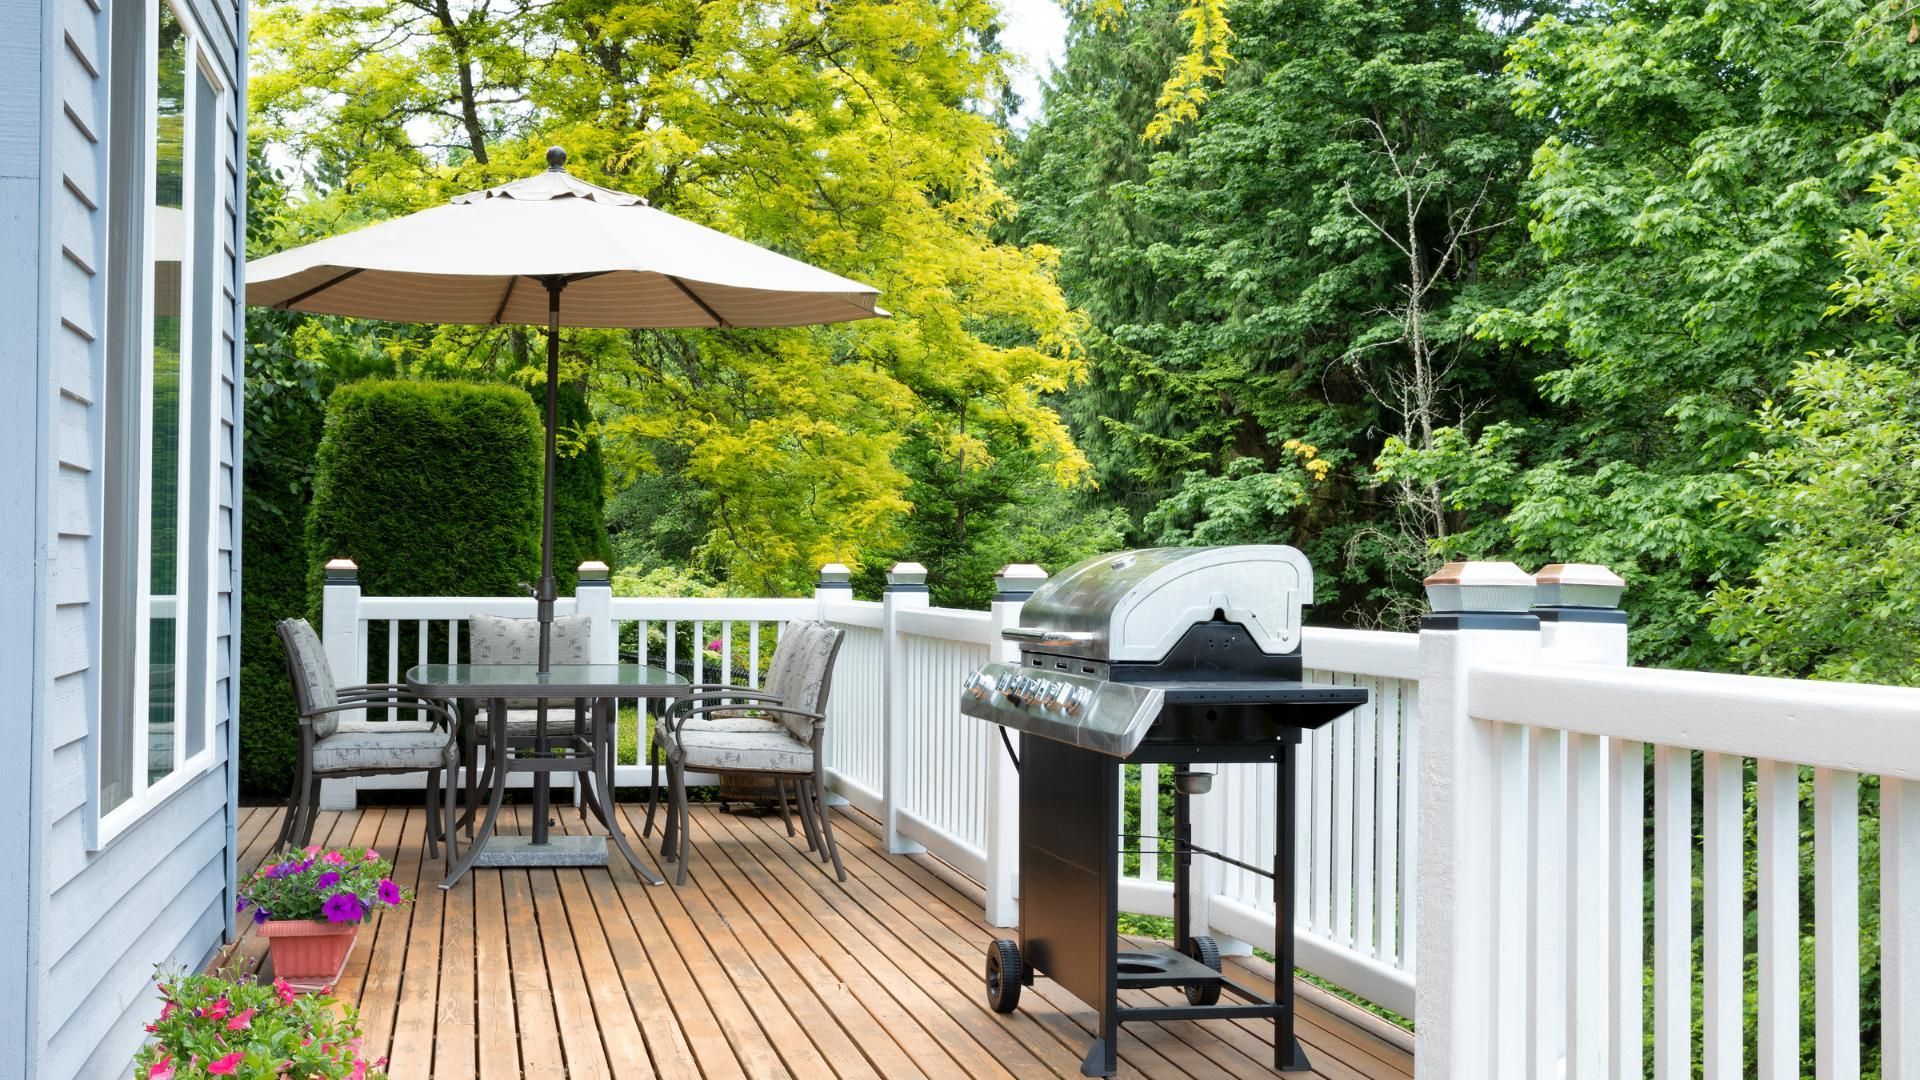 Home Deck and Patio with Outdoor Furniture